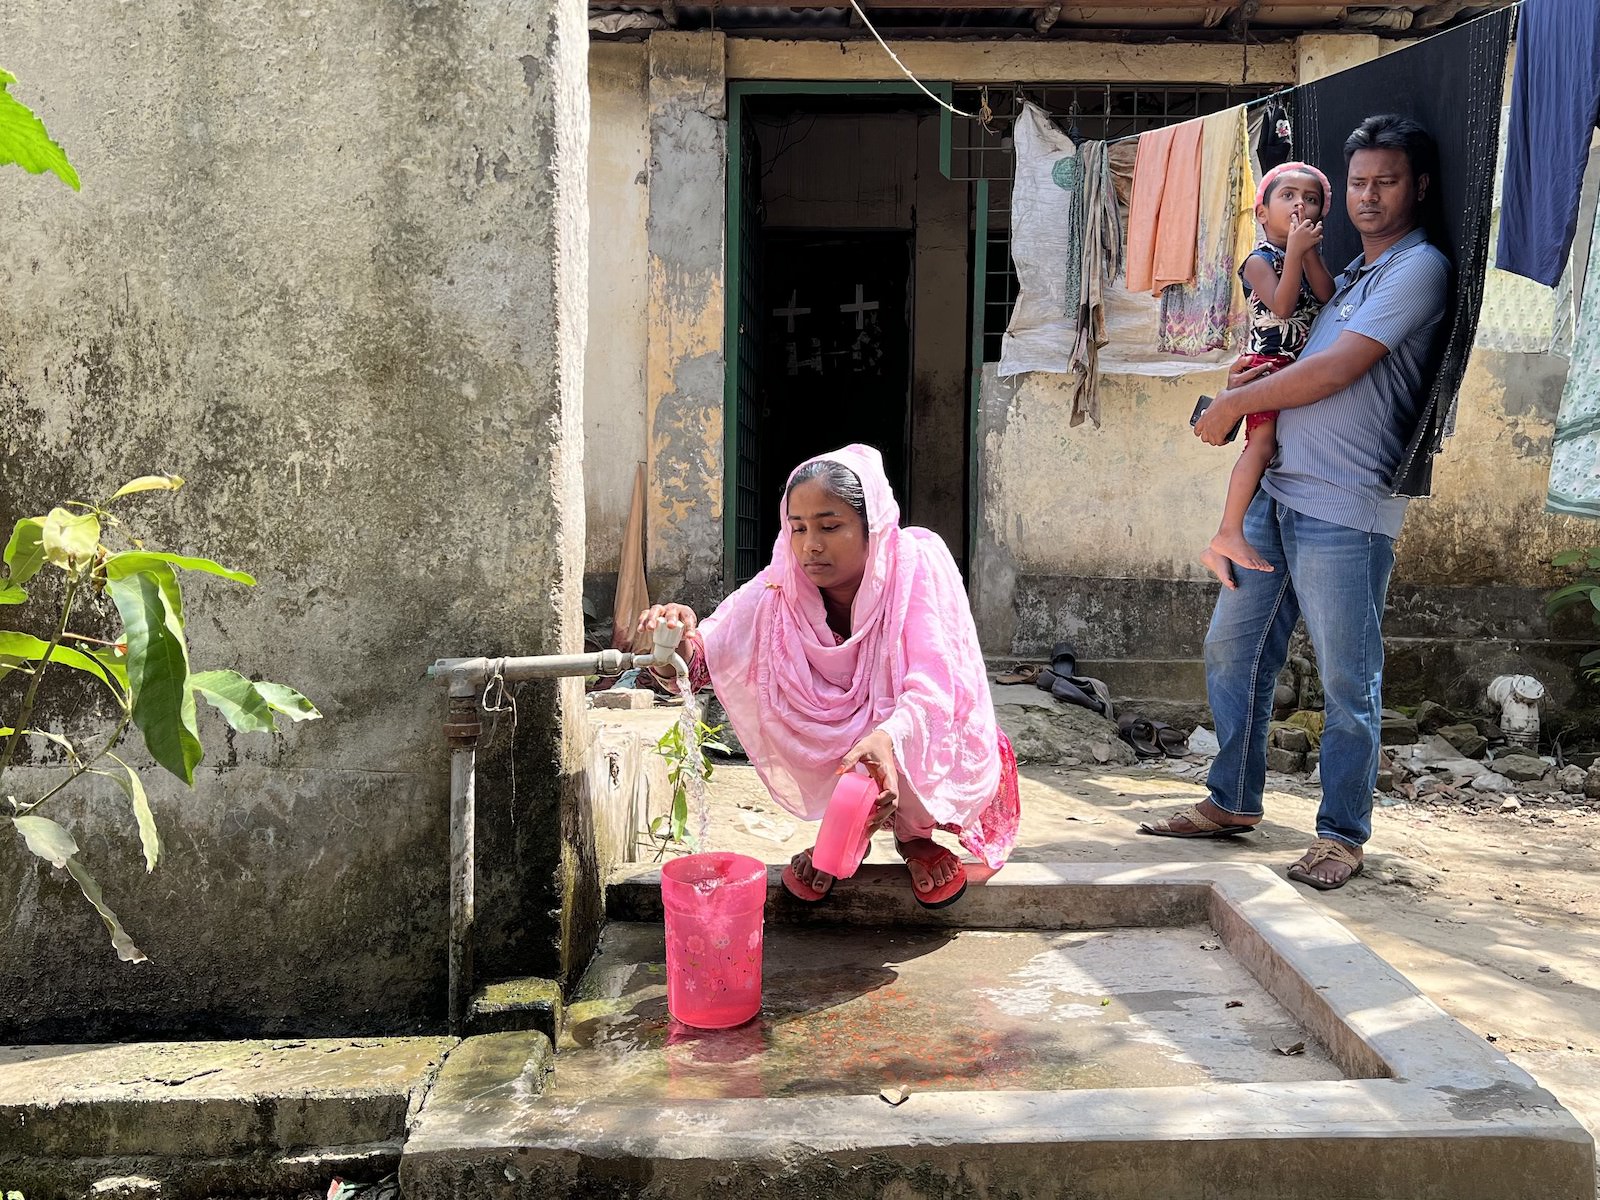 Wearing pink from head to toe, Akhter fills pink pitchers with water from a spigot in front of her house. Her husband, Shamim, stands nearby holding their daughter, Muntaha, in his arms.